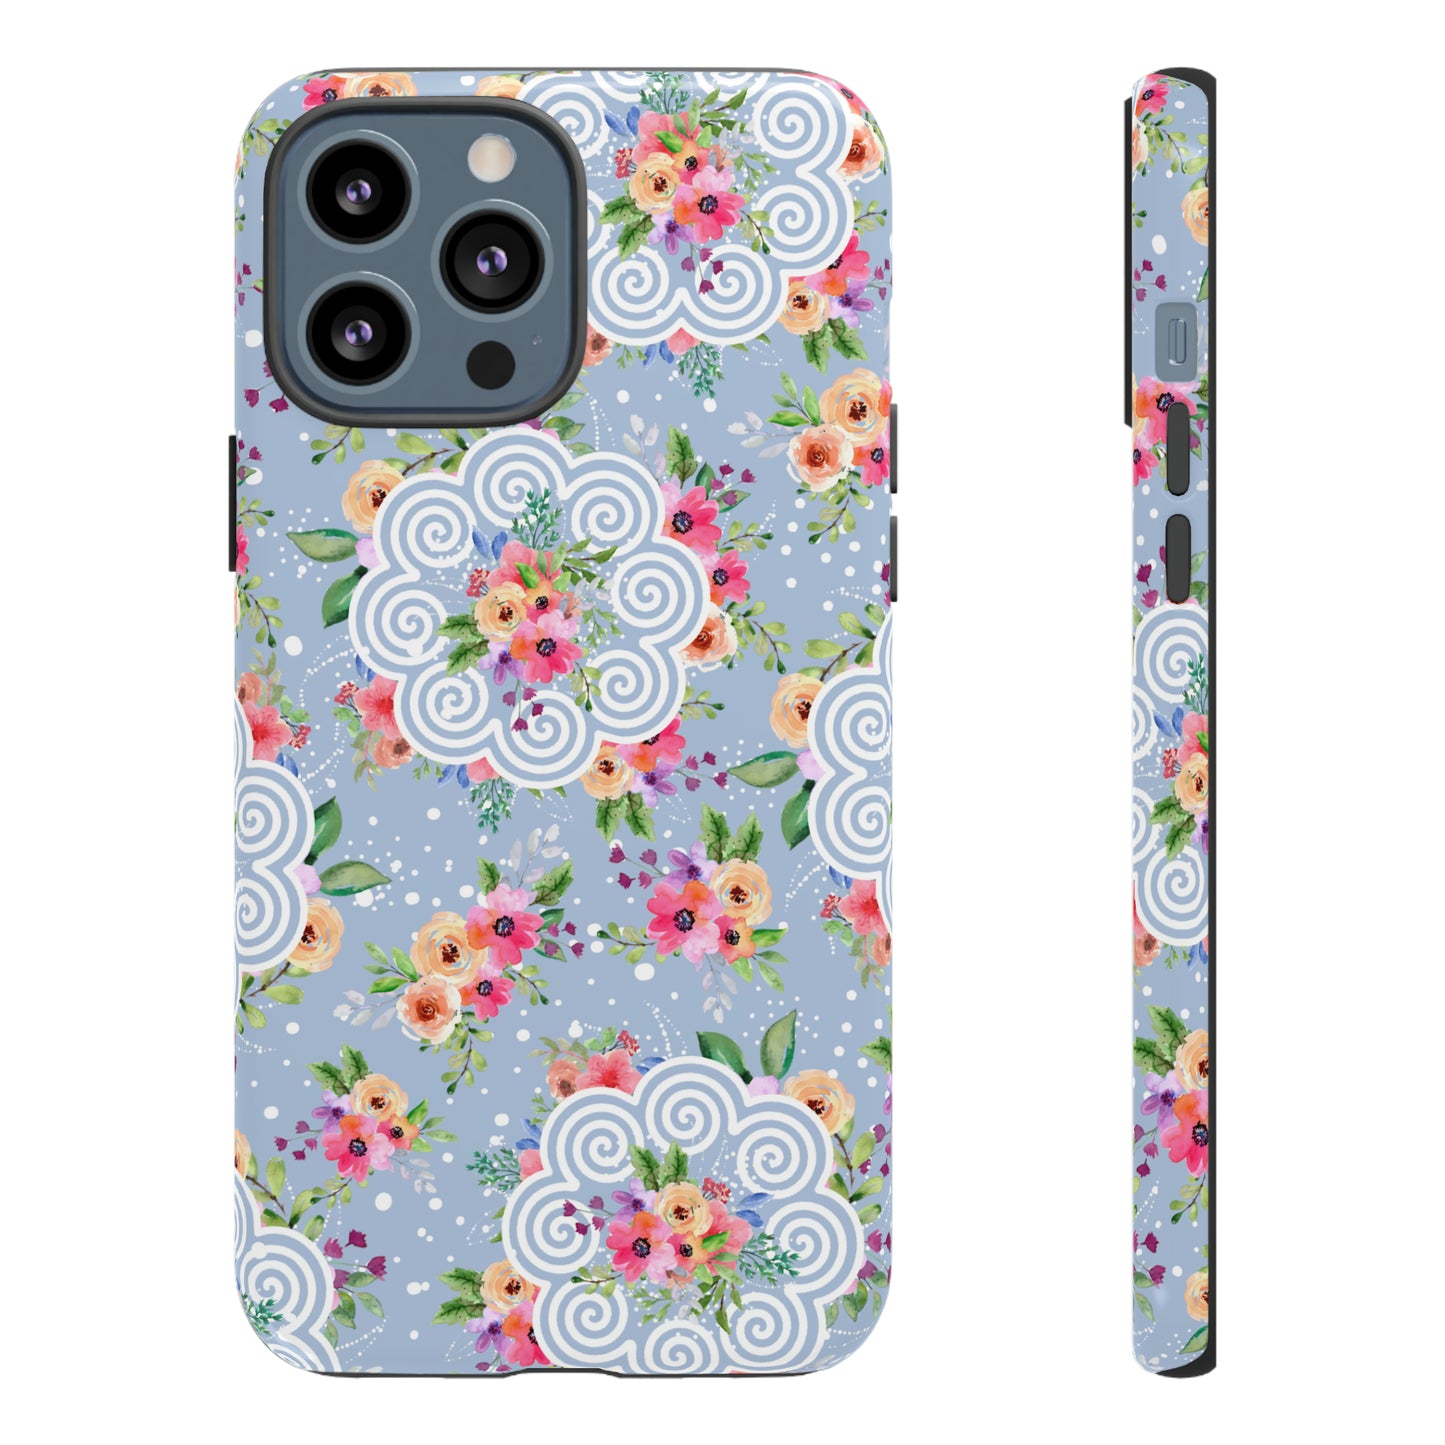 Phone Case - Floral Hmong Inspired Blue